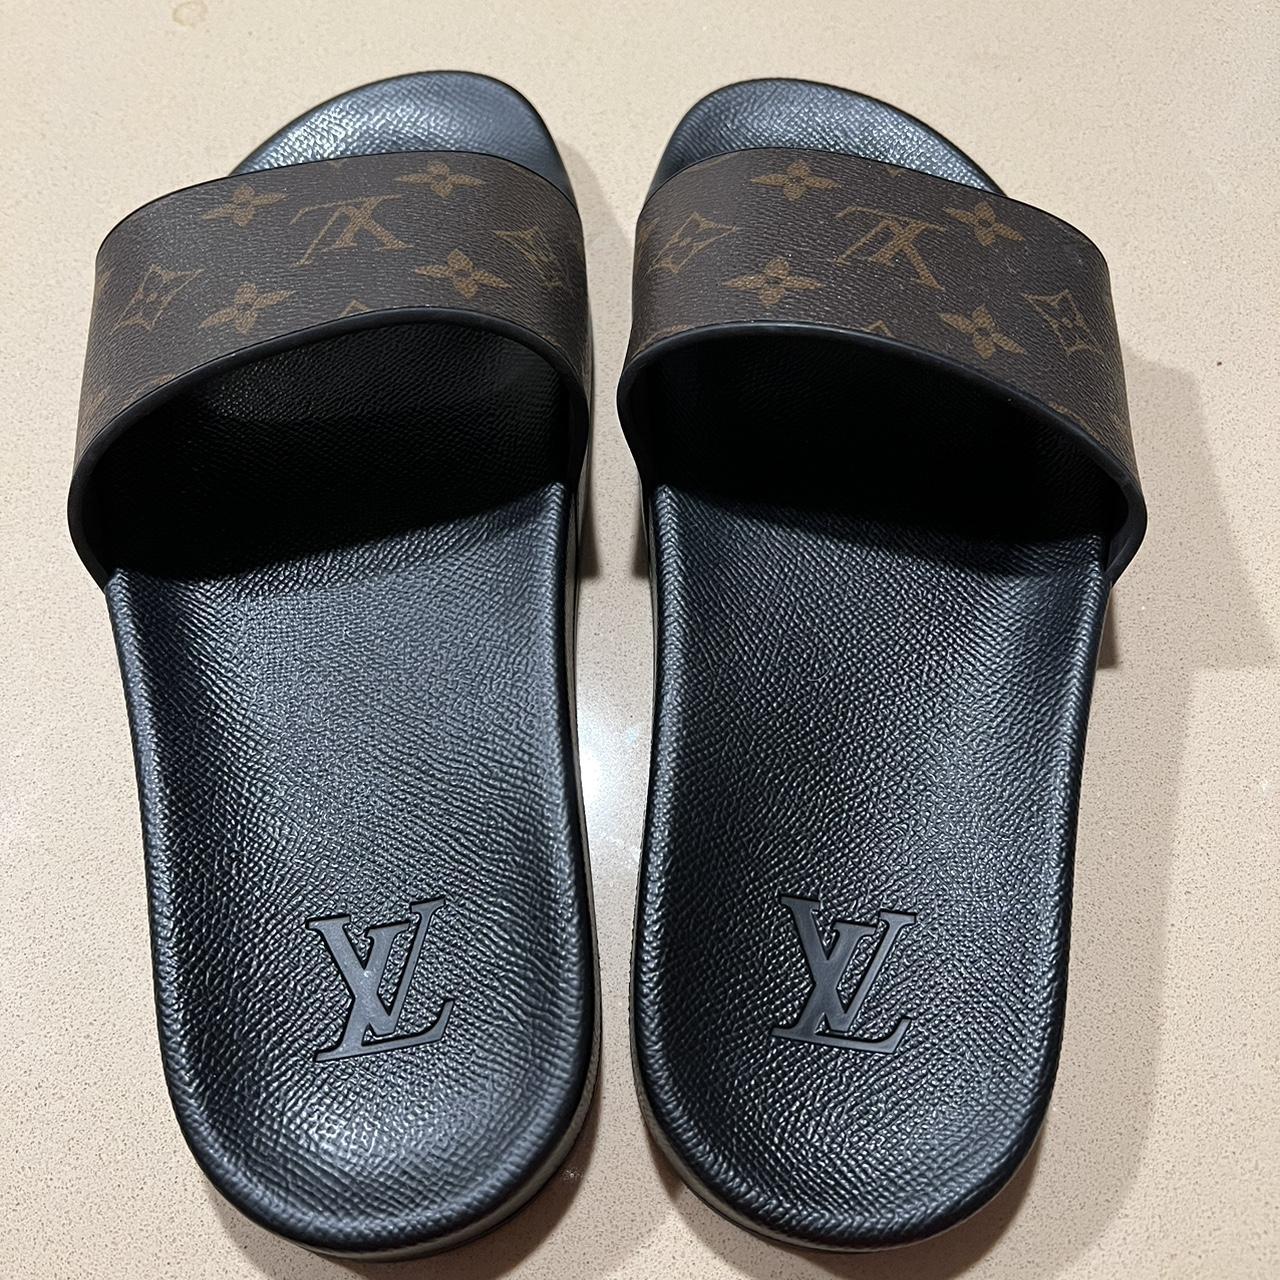 LV sliders 🔲/ these are really 🔥/ RRP: £380 🙄/ our - Depop